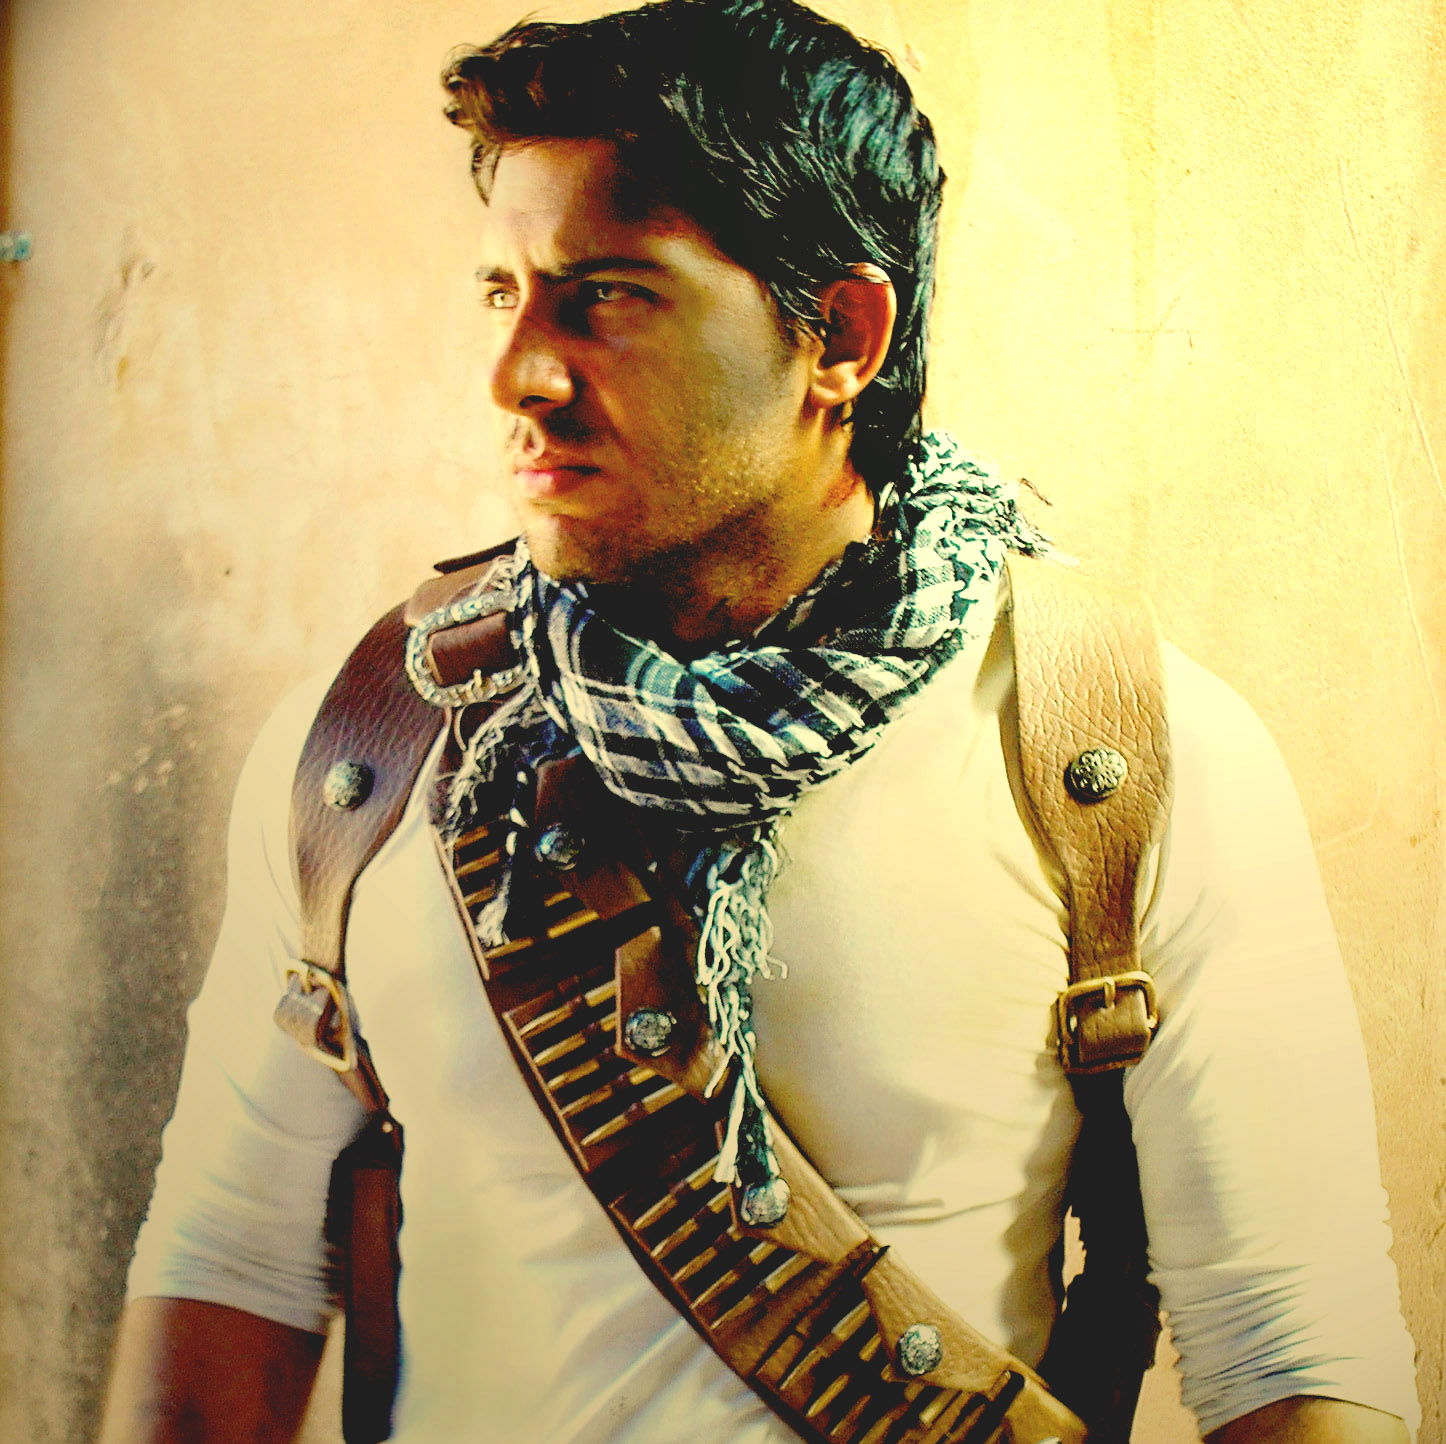 Nathan Drake-Uncharted 3 by MaicouManiezzo on DeviantArt